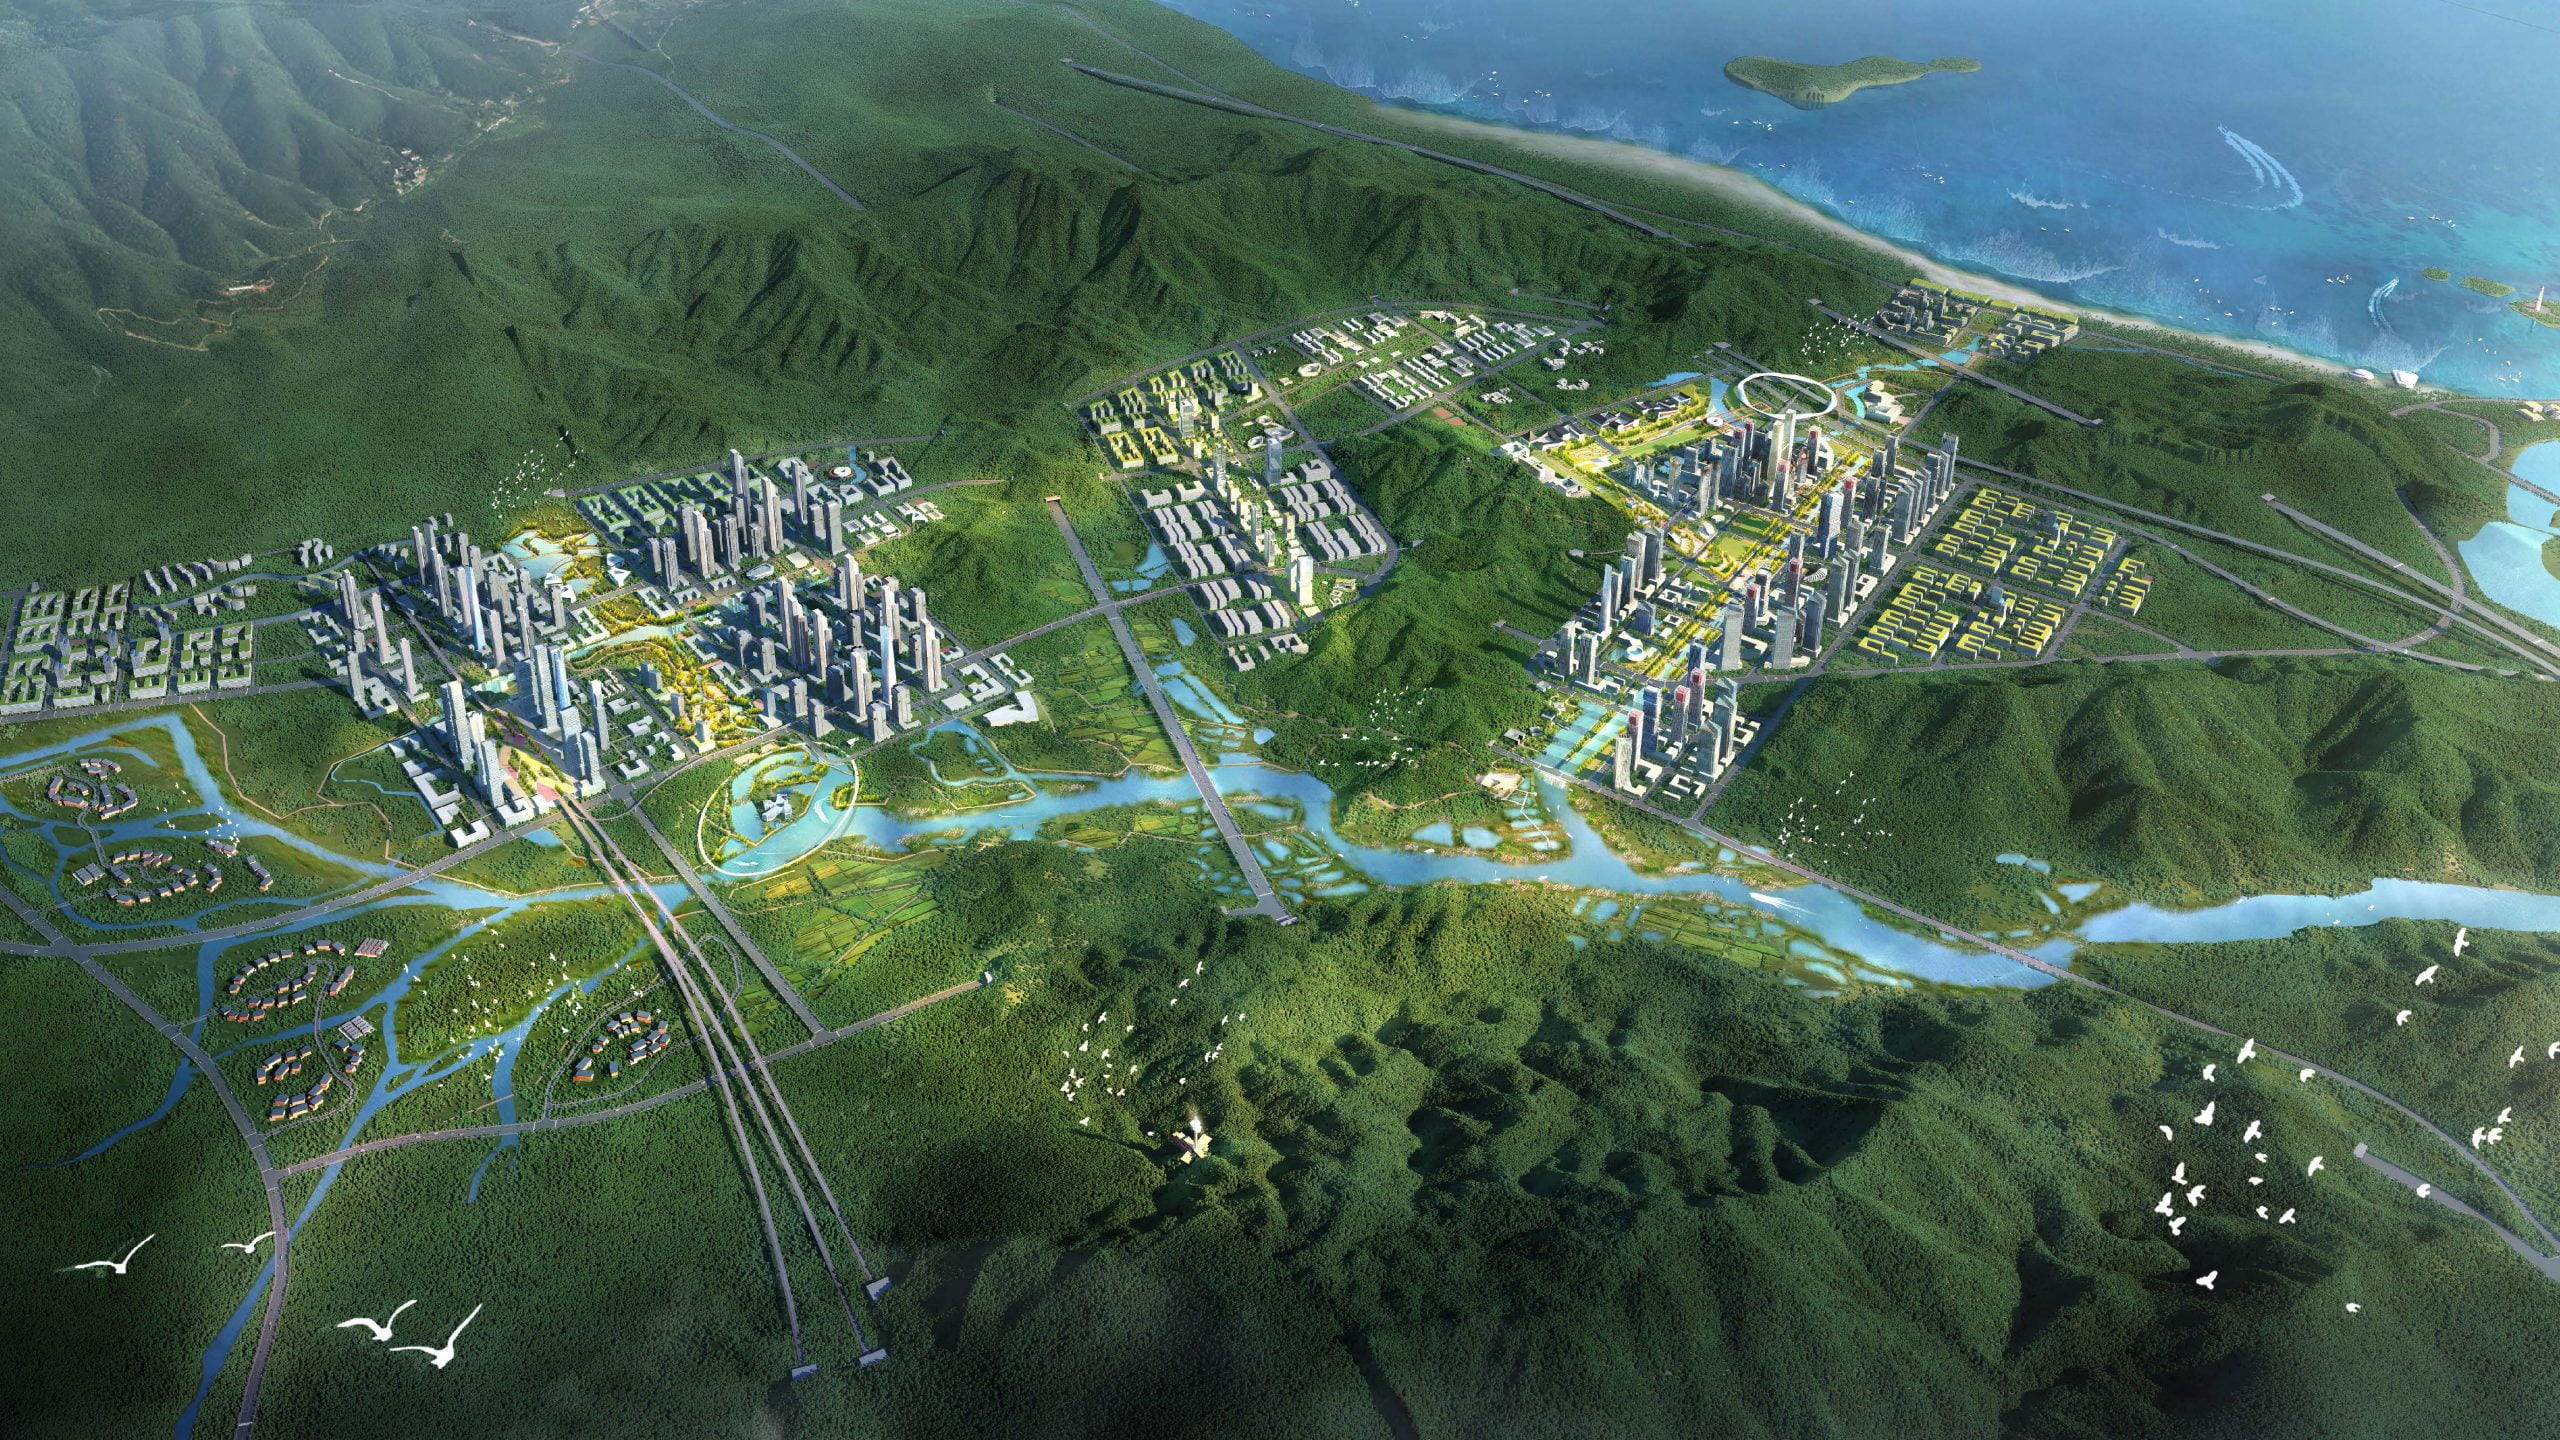 Shenshan is a new city in southern China designed by McGregor Coxall and South China University of Technology (SCUT) using the Biourbanism model.